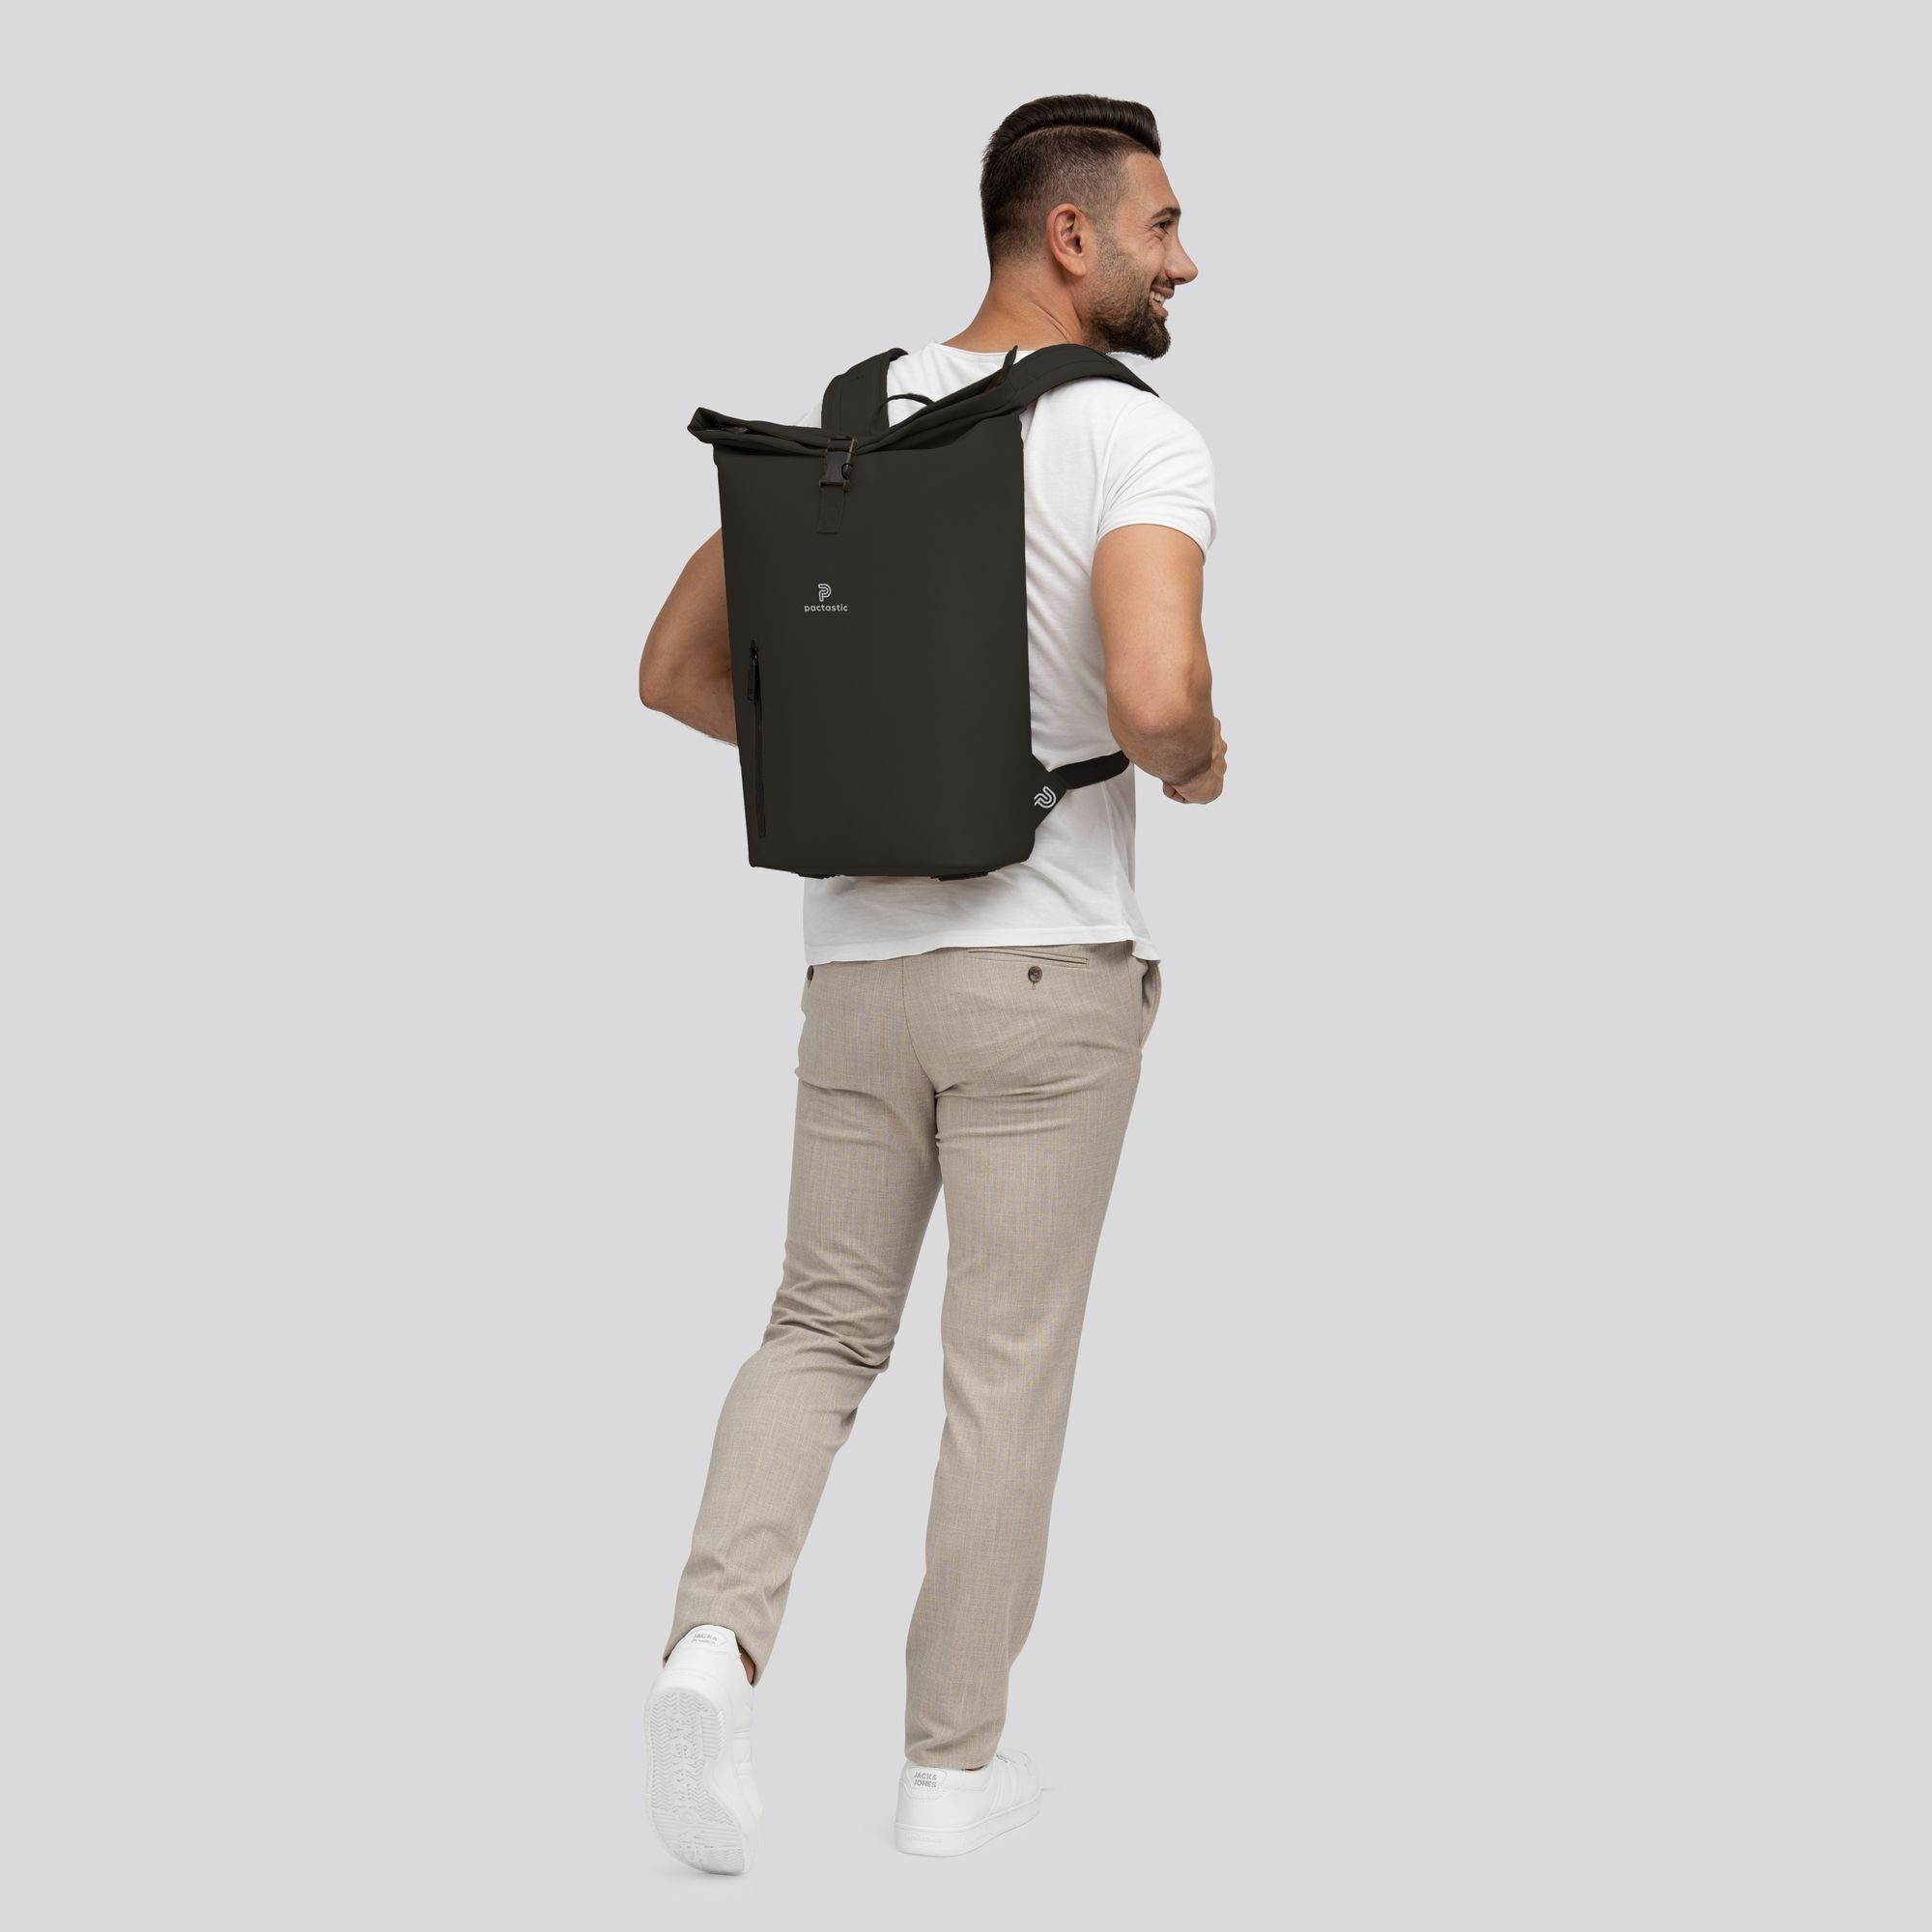 Pactastic Daypack Urban Tech-Material Collection, black Veganes